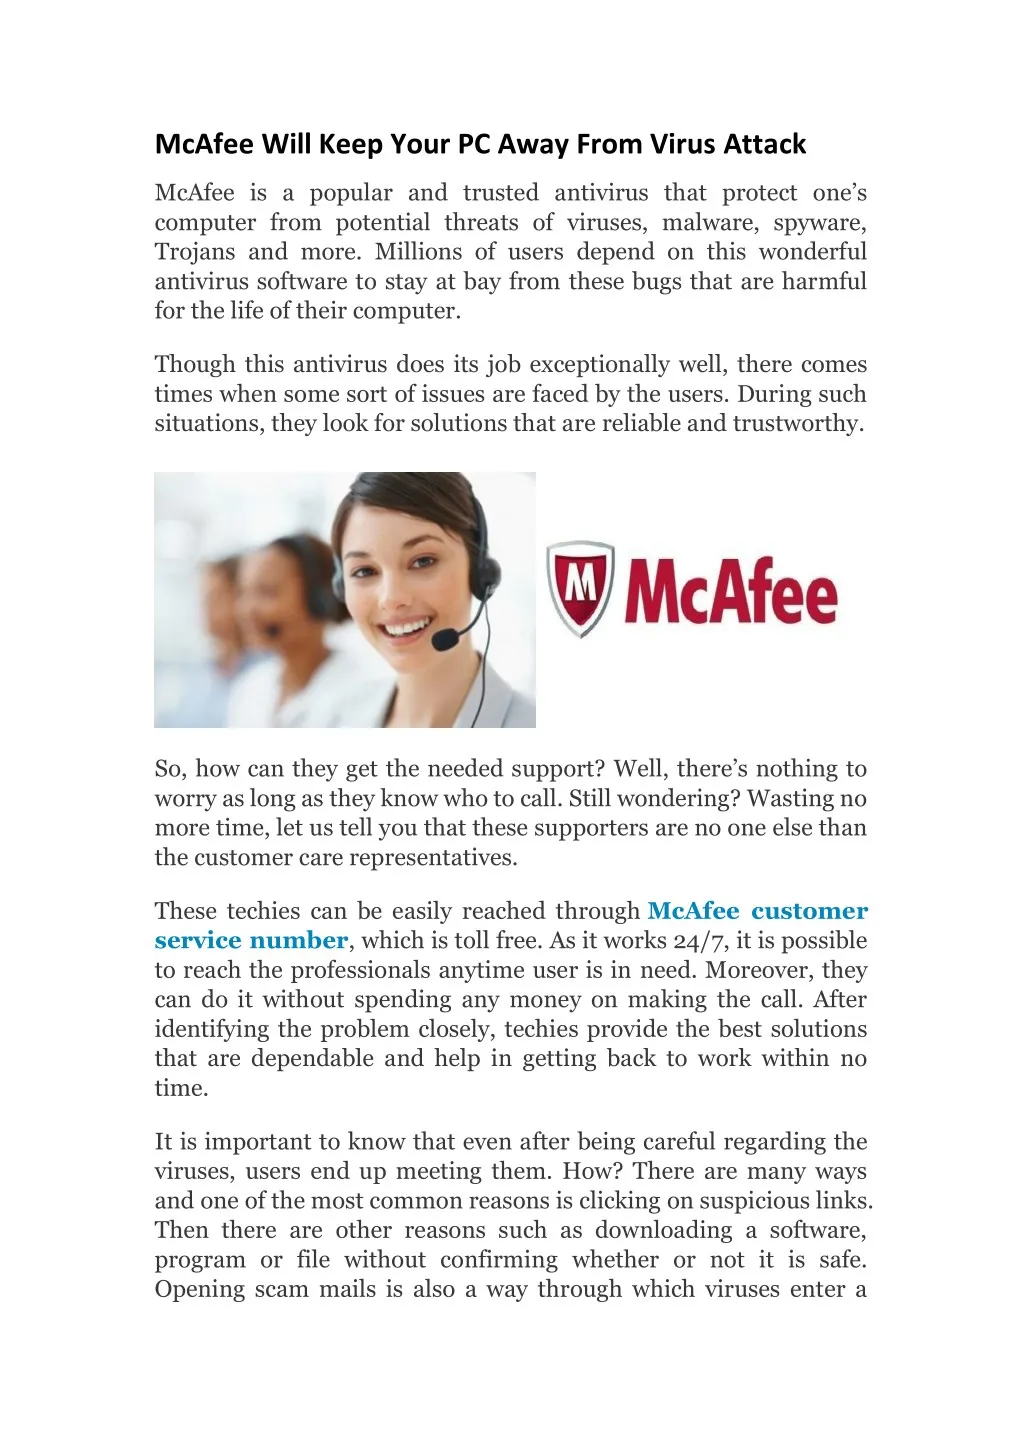 mcafee will keep your pc away from virus attack